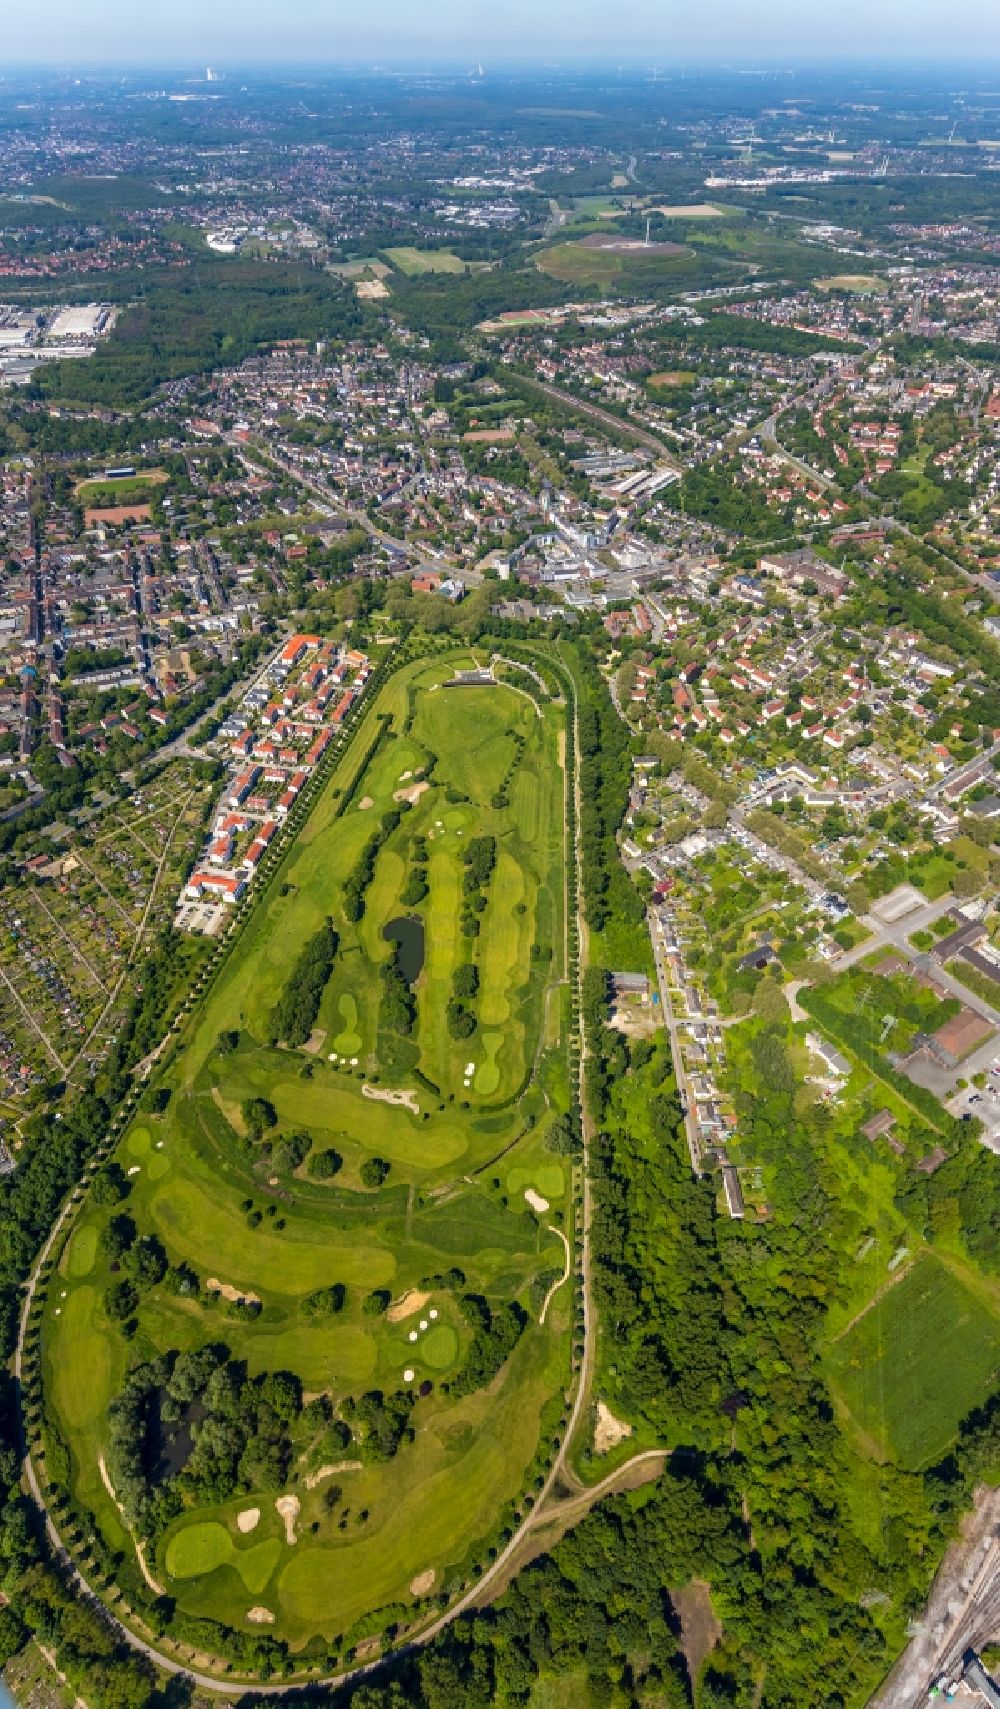 Aerial photograph Gelsenkirchen - Grounds of the Golf course at of GC Schloss Horst GmbH & Co. KG on Johannastrasse in Gelsenkirchen at Ruhrgebiet in the state North Rhine-Westphalia, Germany